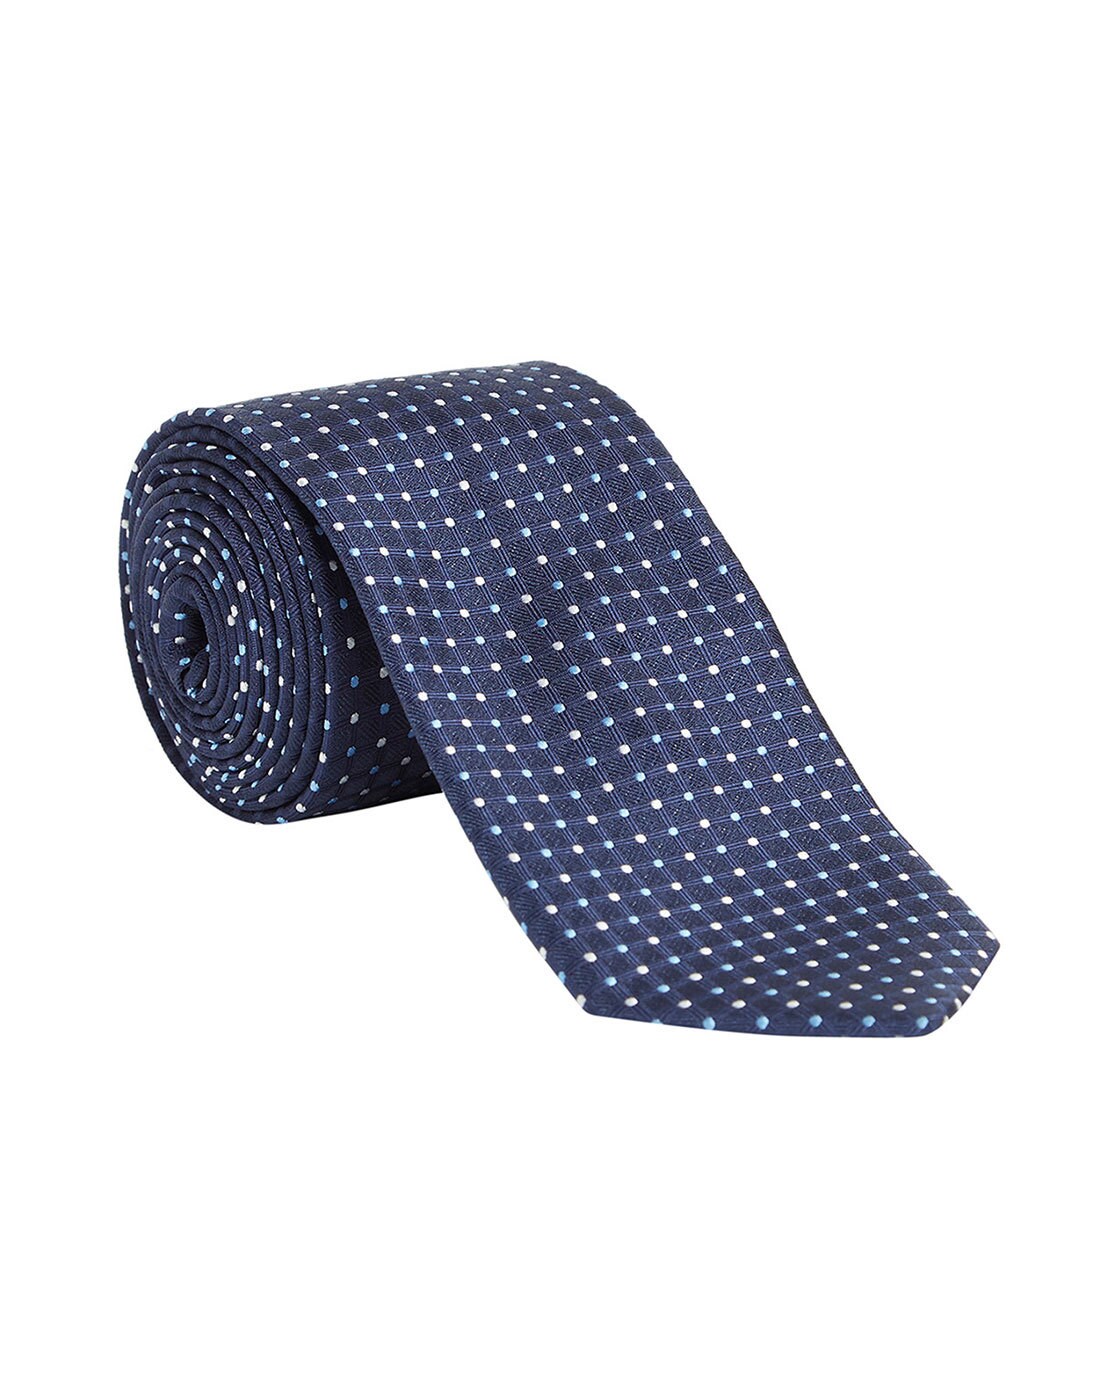 RIXON GROOVE (LIMITED EDITION) MEN'S TIE 100% Polyester MADE IN